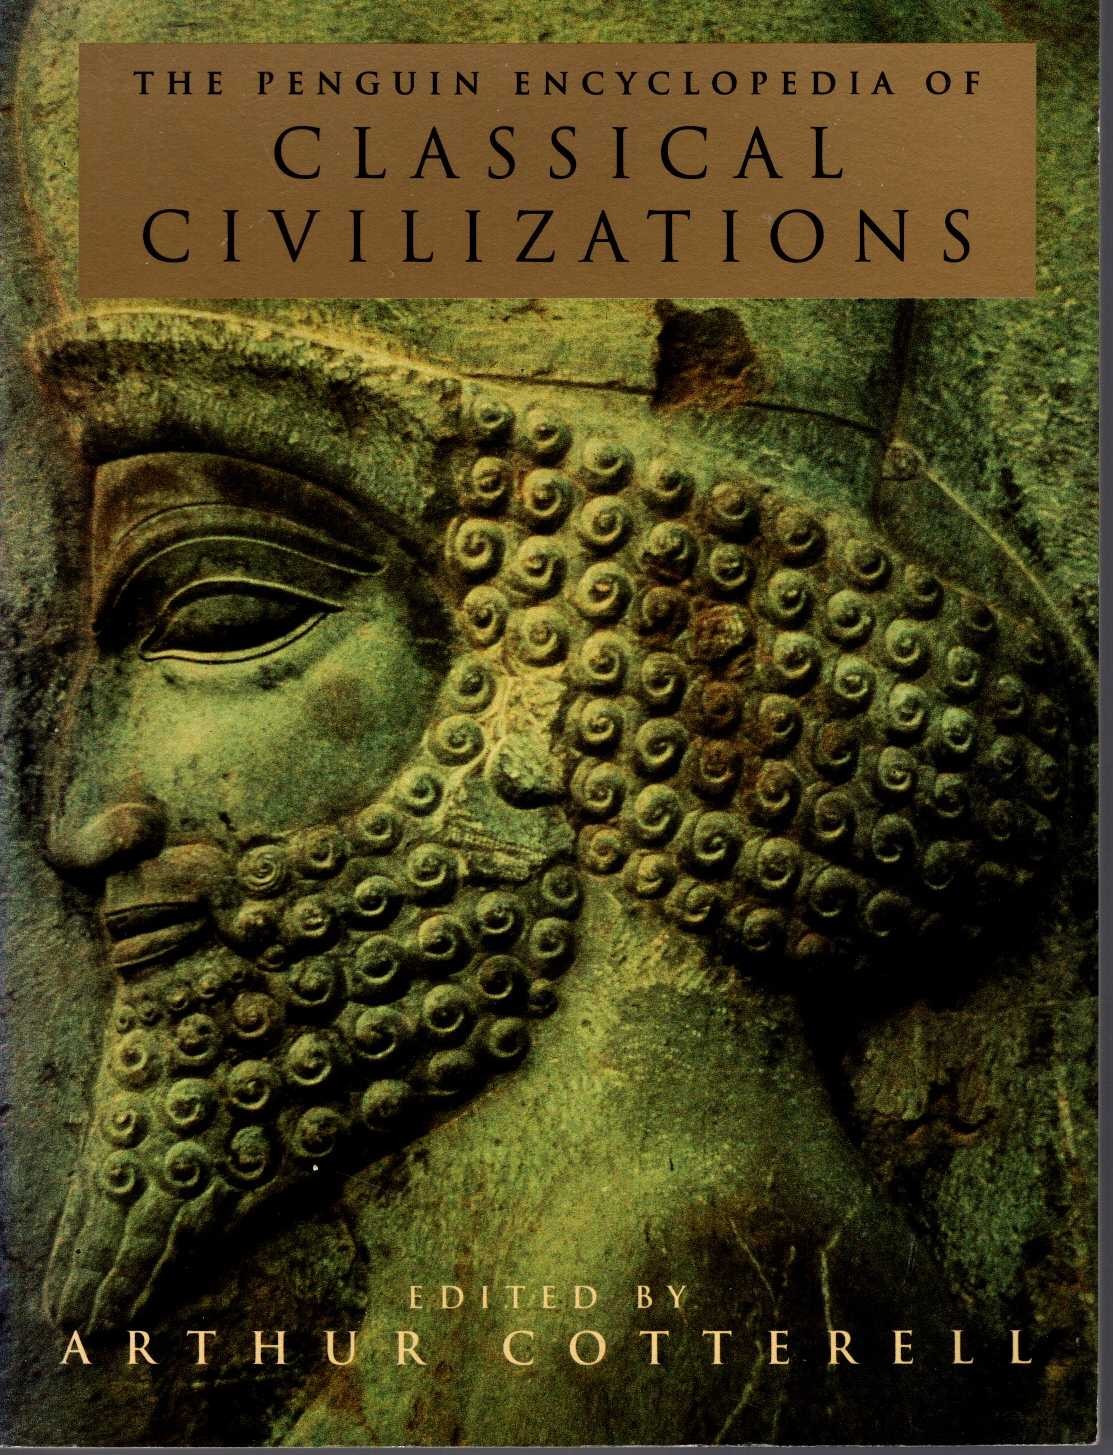 Arthur Cotterell (edits) THE PENGUIN ENCYCLOPEDIA OF CLASSICAL CIVILIZATIONS front book cover image